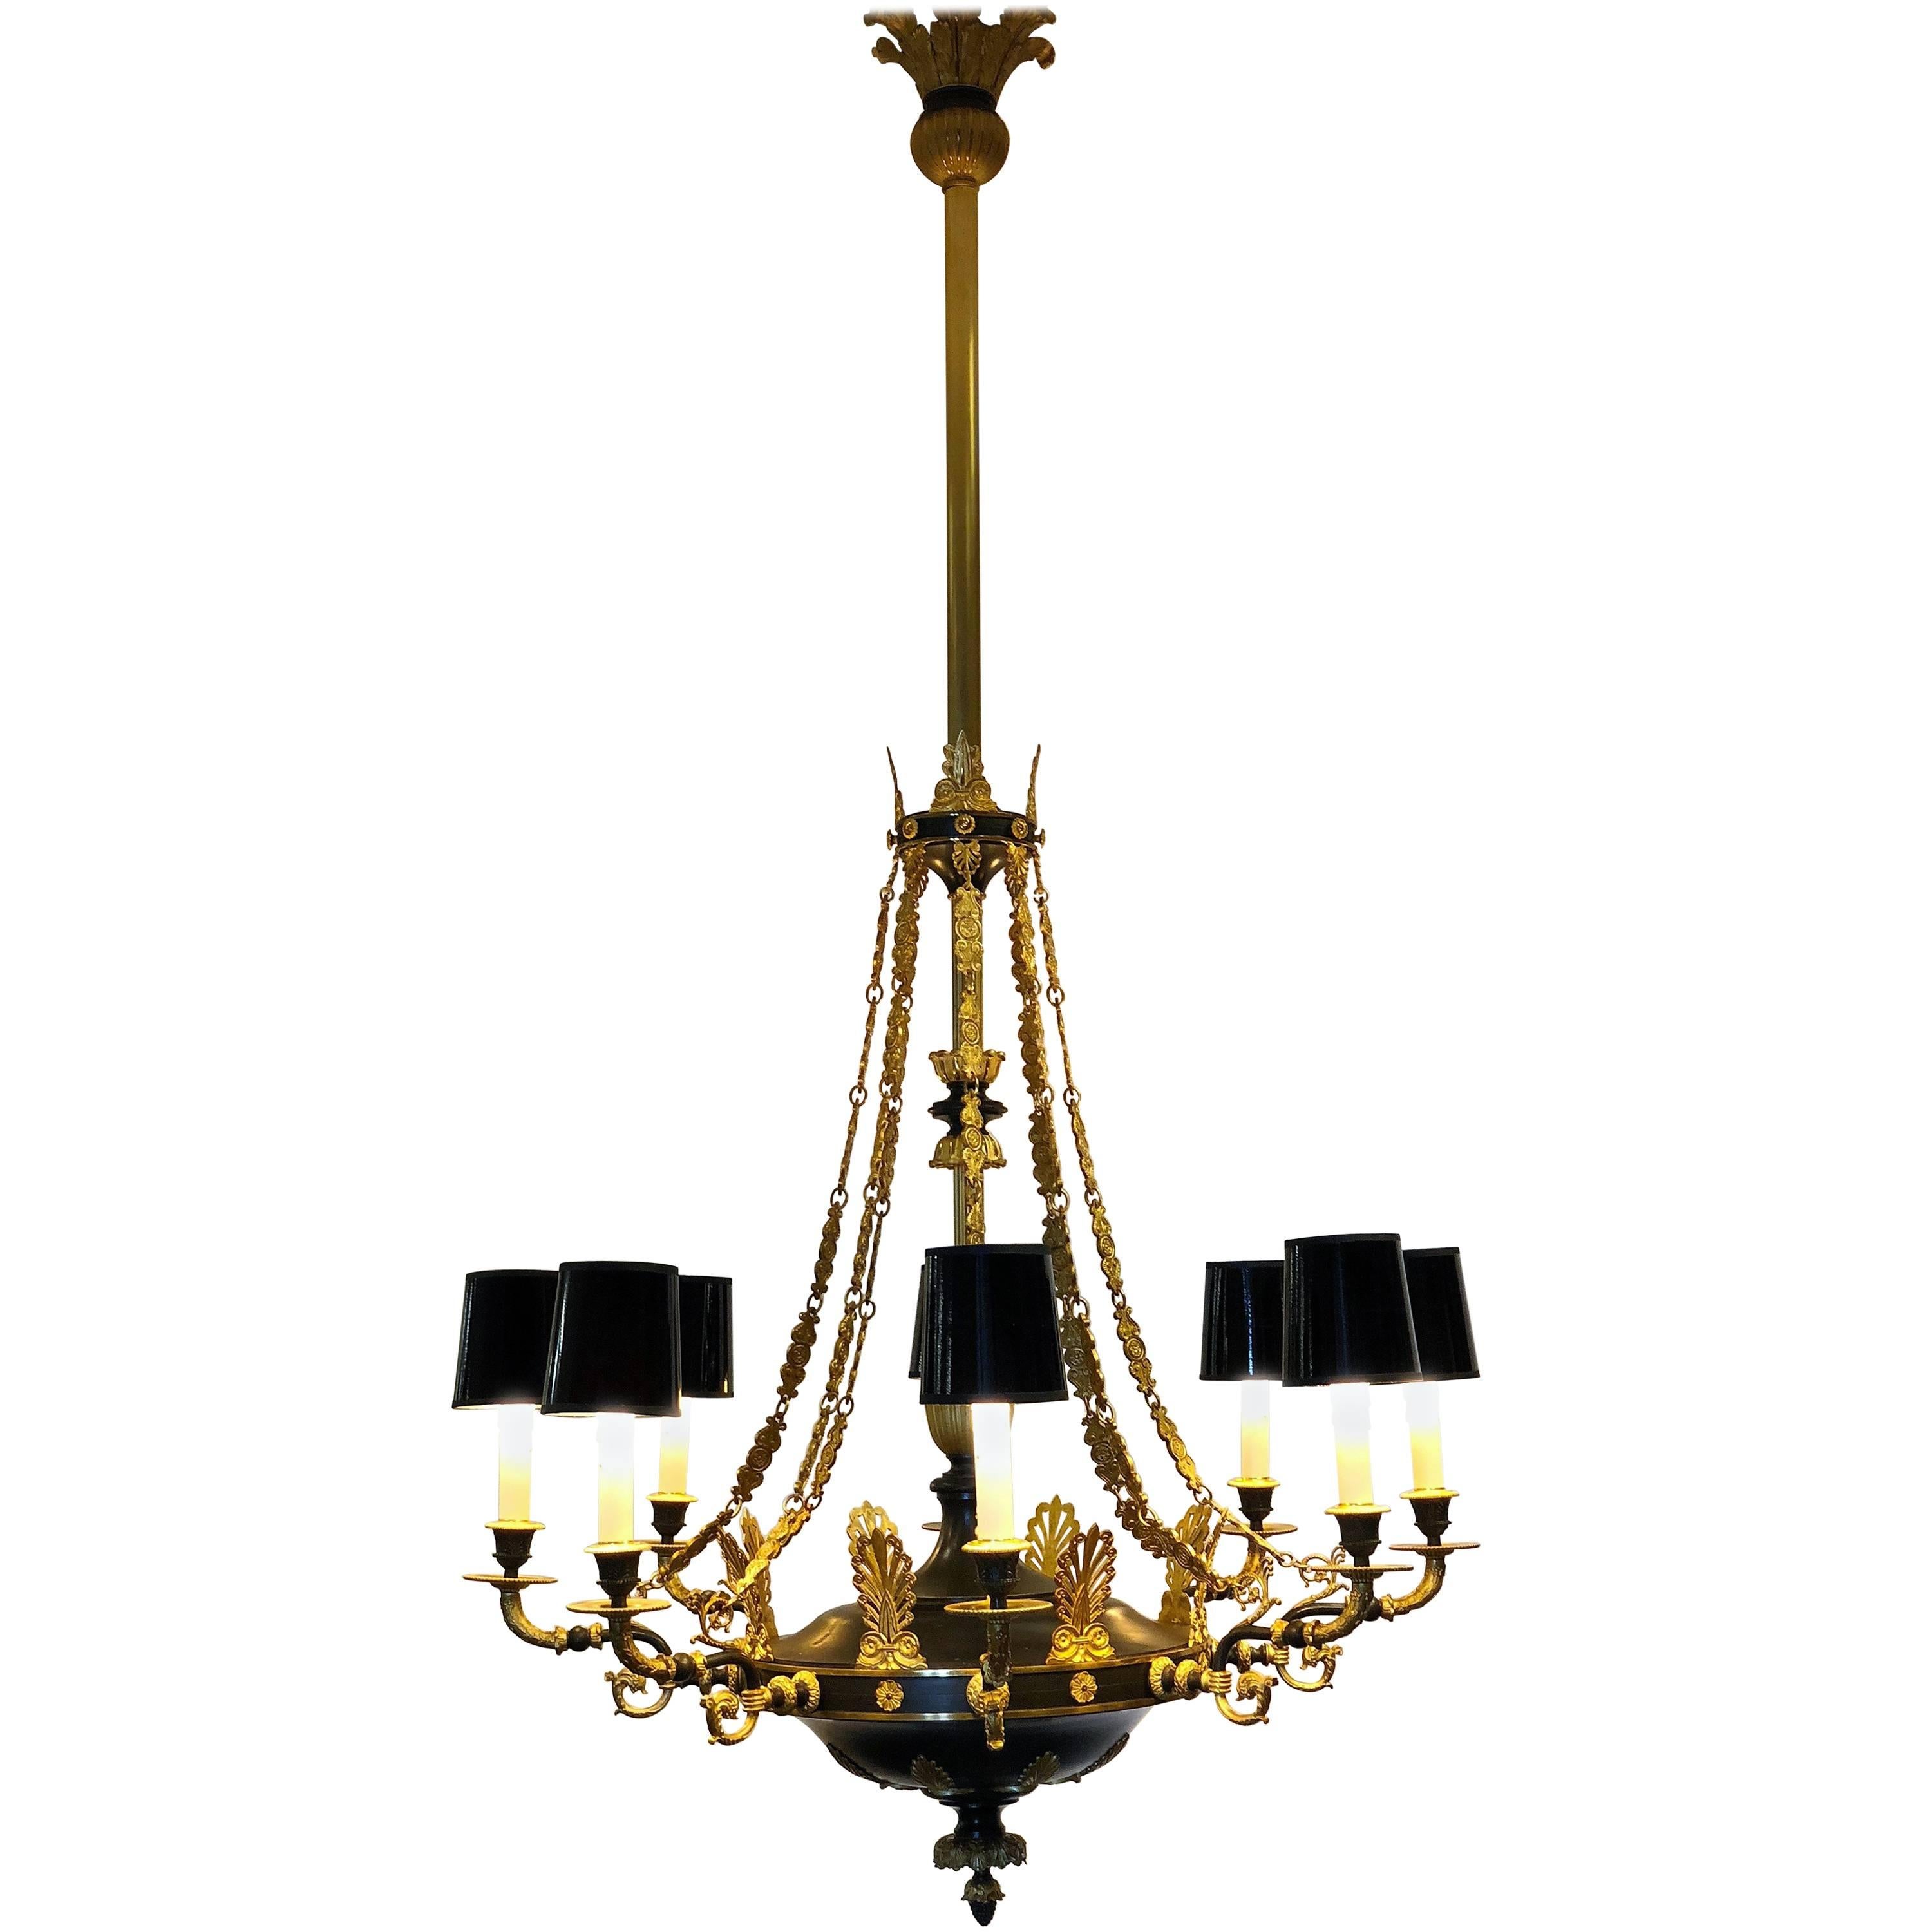 20th Century Neoclassical Empire French Gild and Patinated Chandelier For Sale